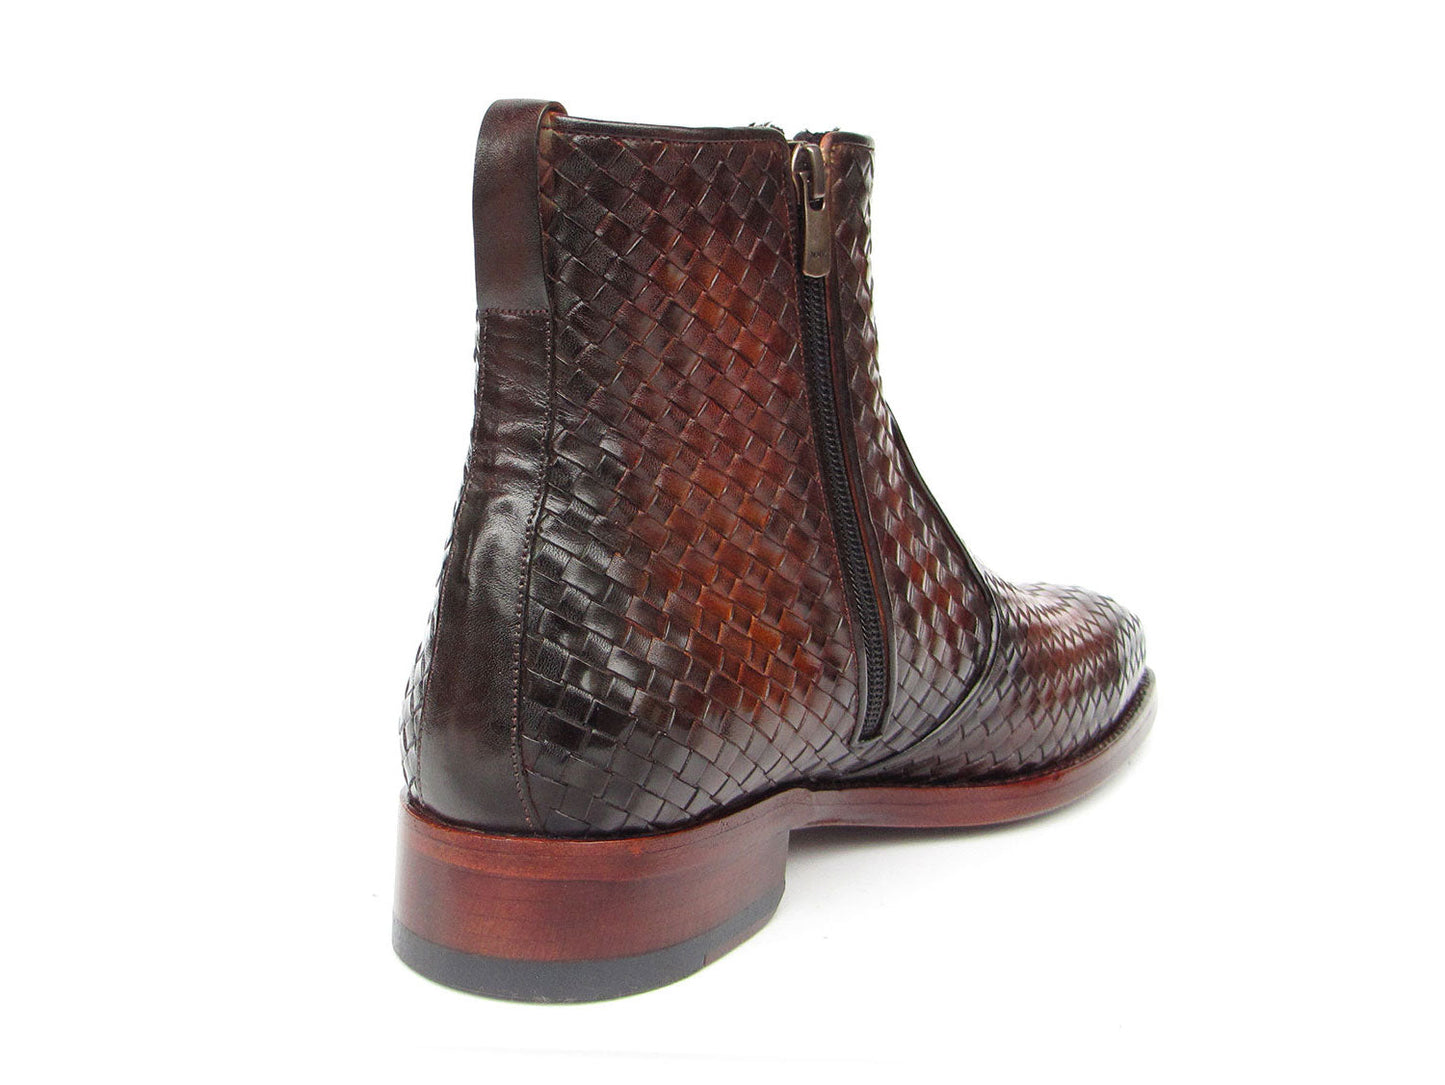 Paul Parkman Brown Burnished Woven Leather Zipper Boots (ID#BT269BRW)